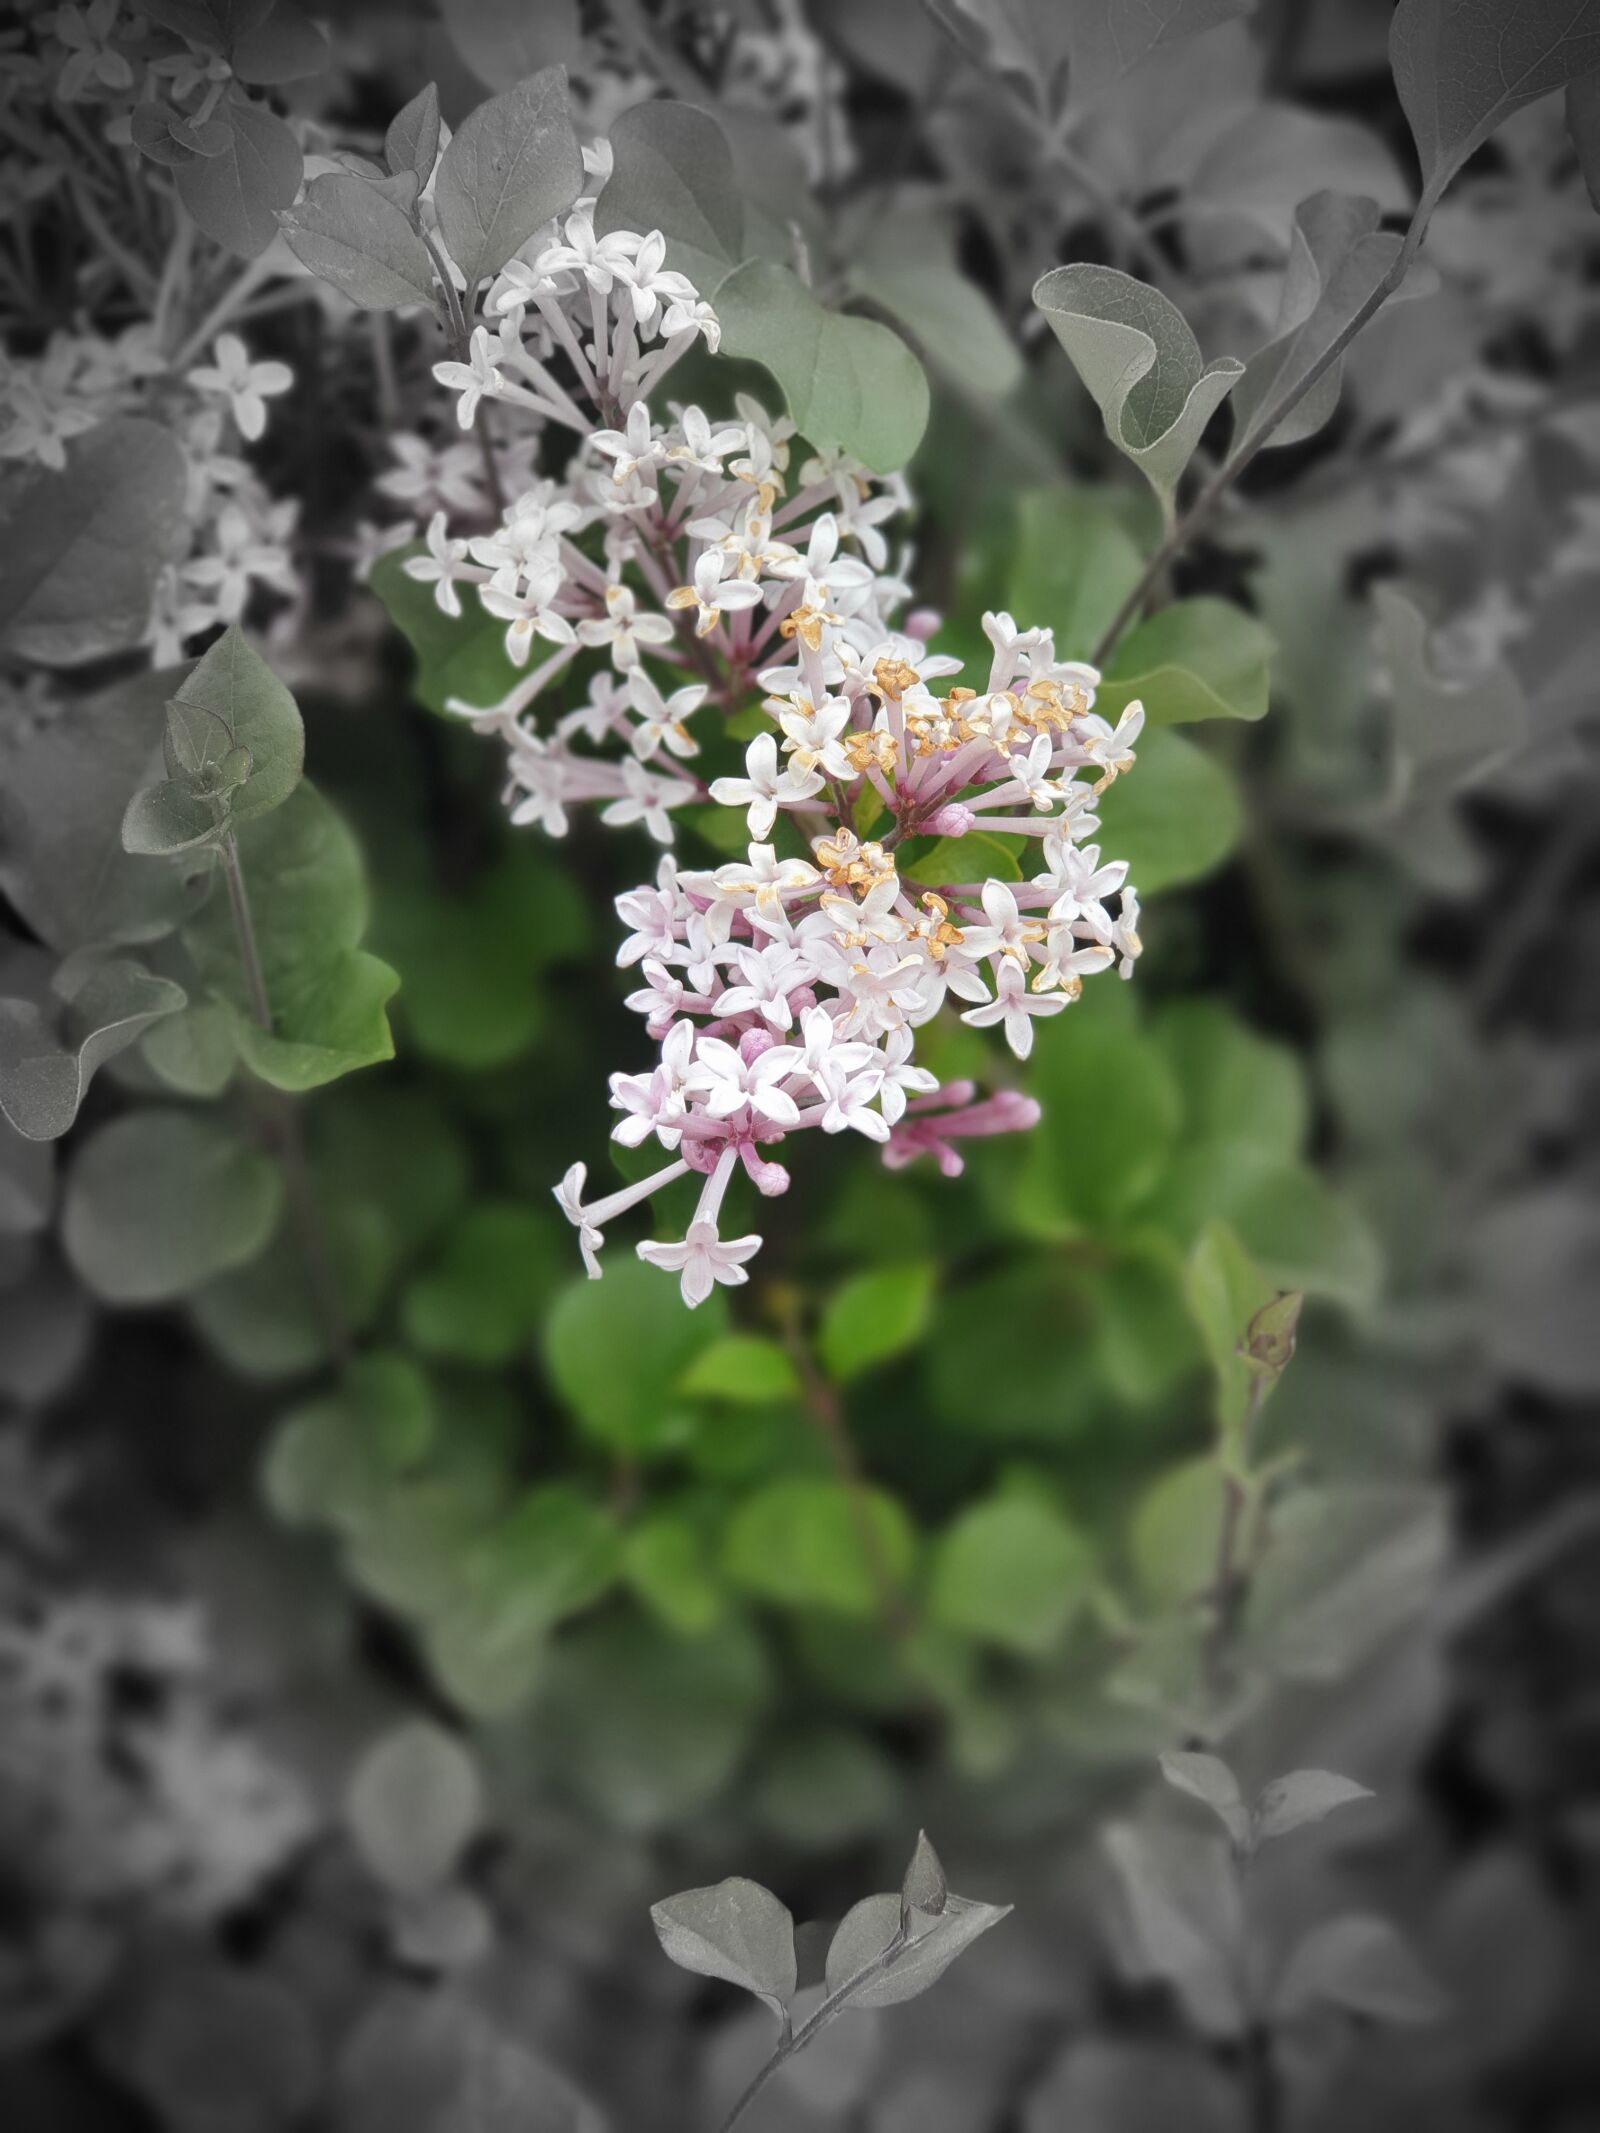 Samsung Galaxy S10+ sample photo. Flower, nature, artistic photography